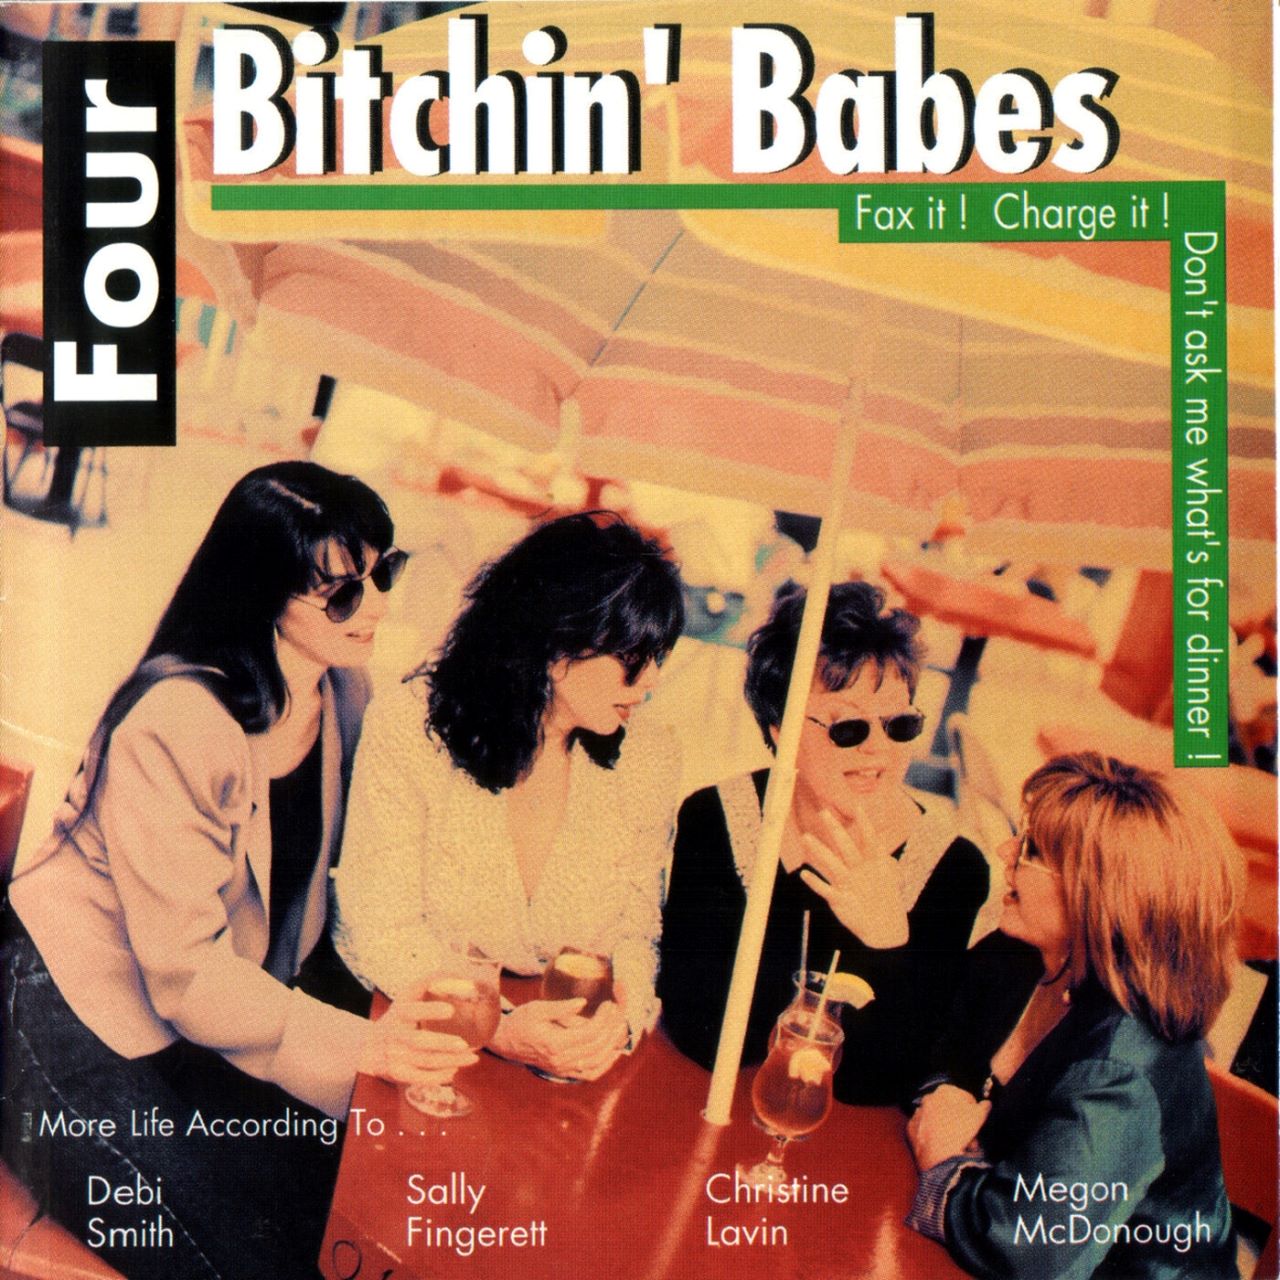 Four Bitchin' Babes - Fax It! Charge It! Don't Ask... cover album